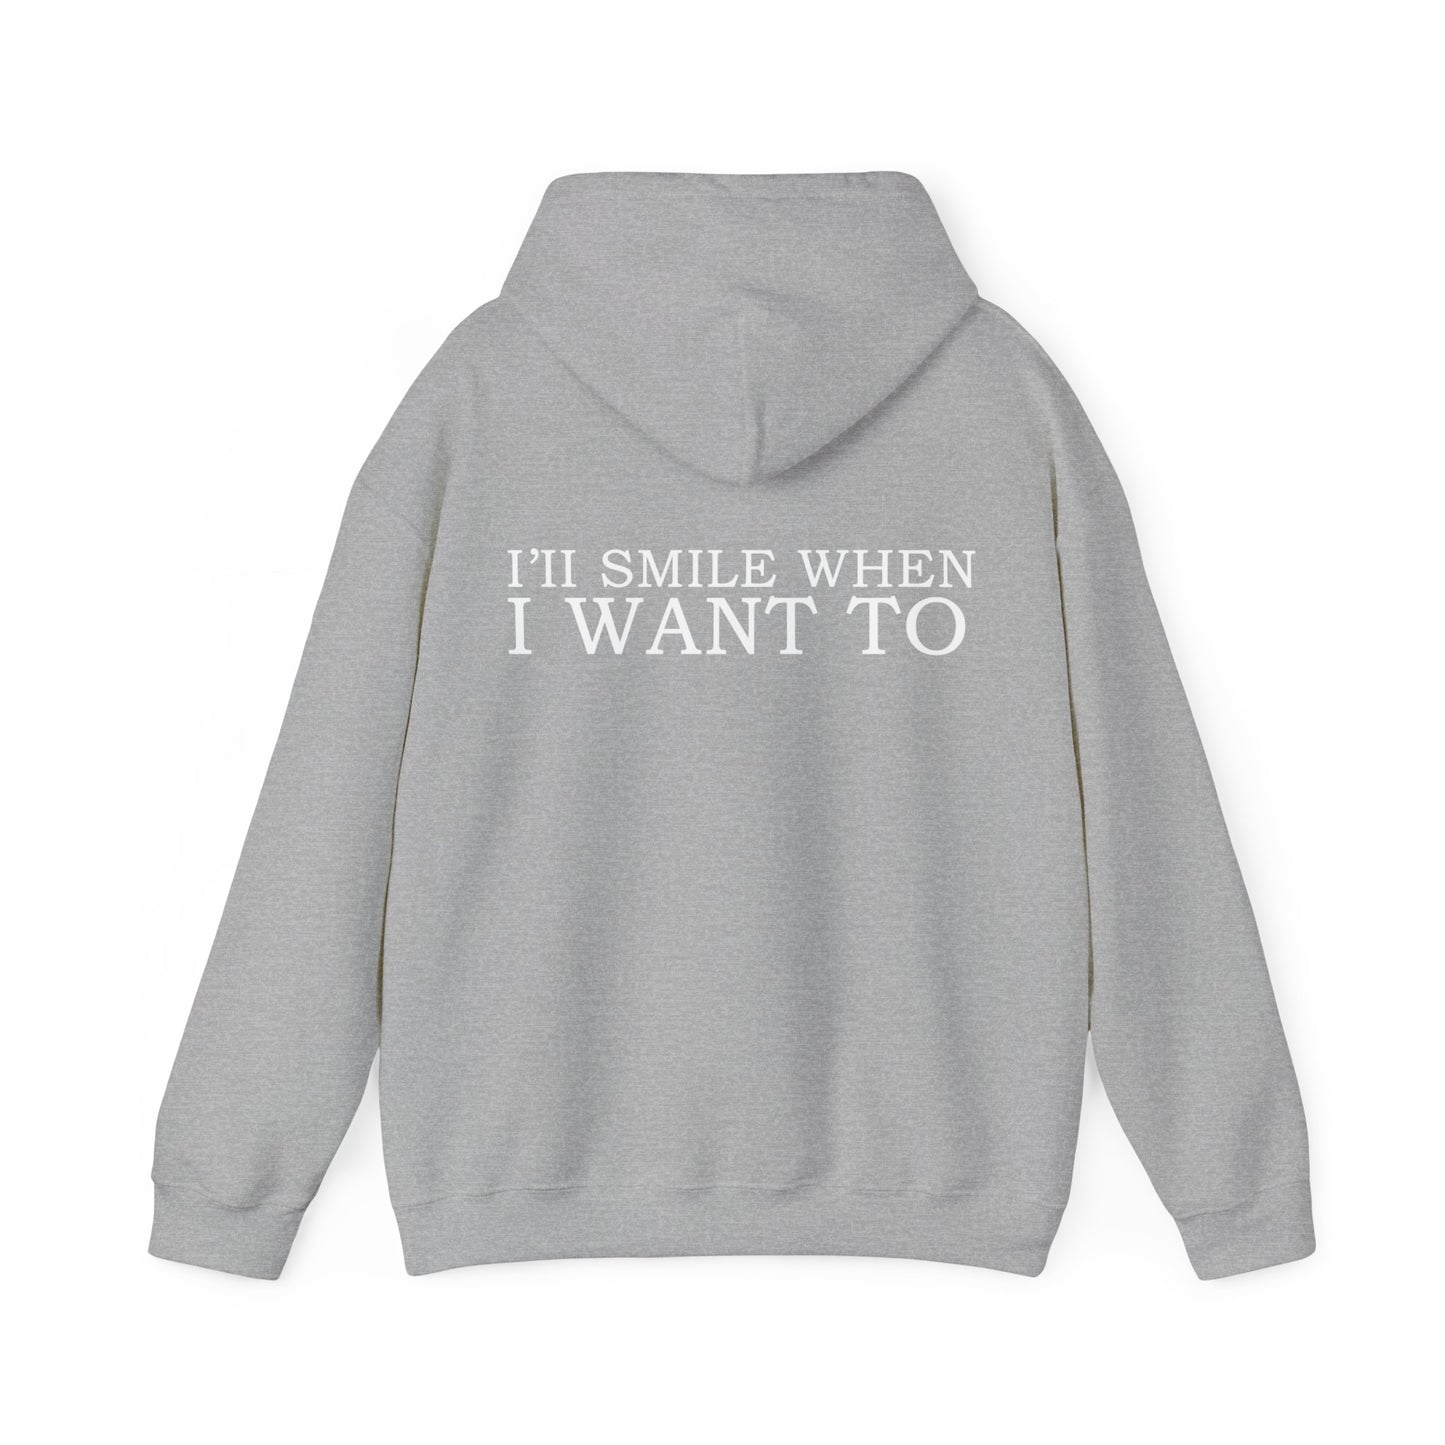 When I Want To - Hoodie